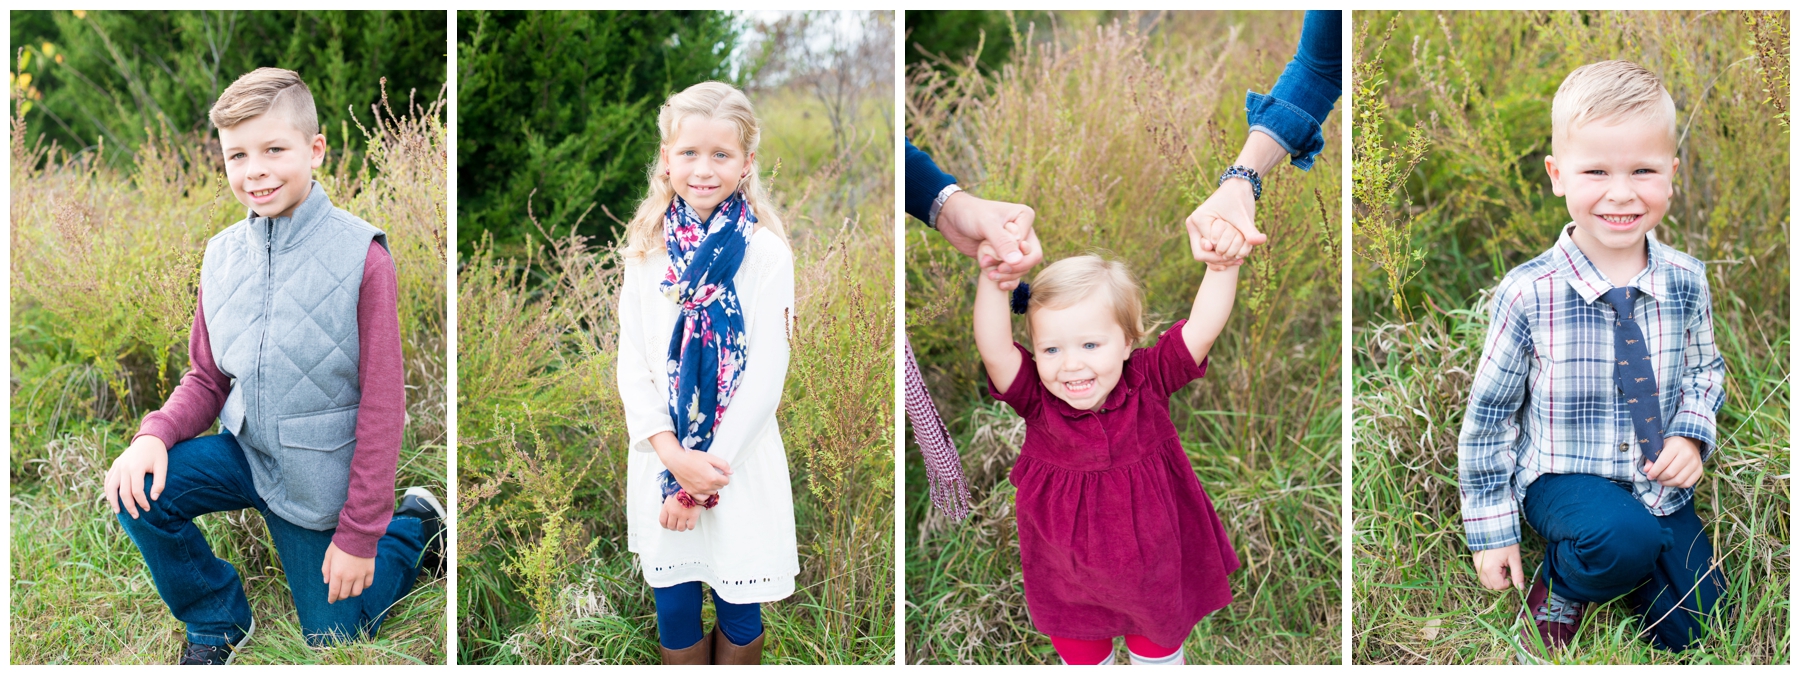 fall-family-pictures-northland-kansas-city_0006